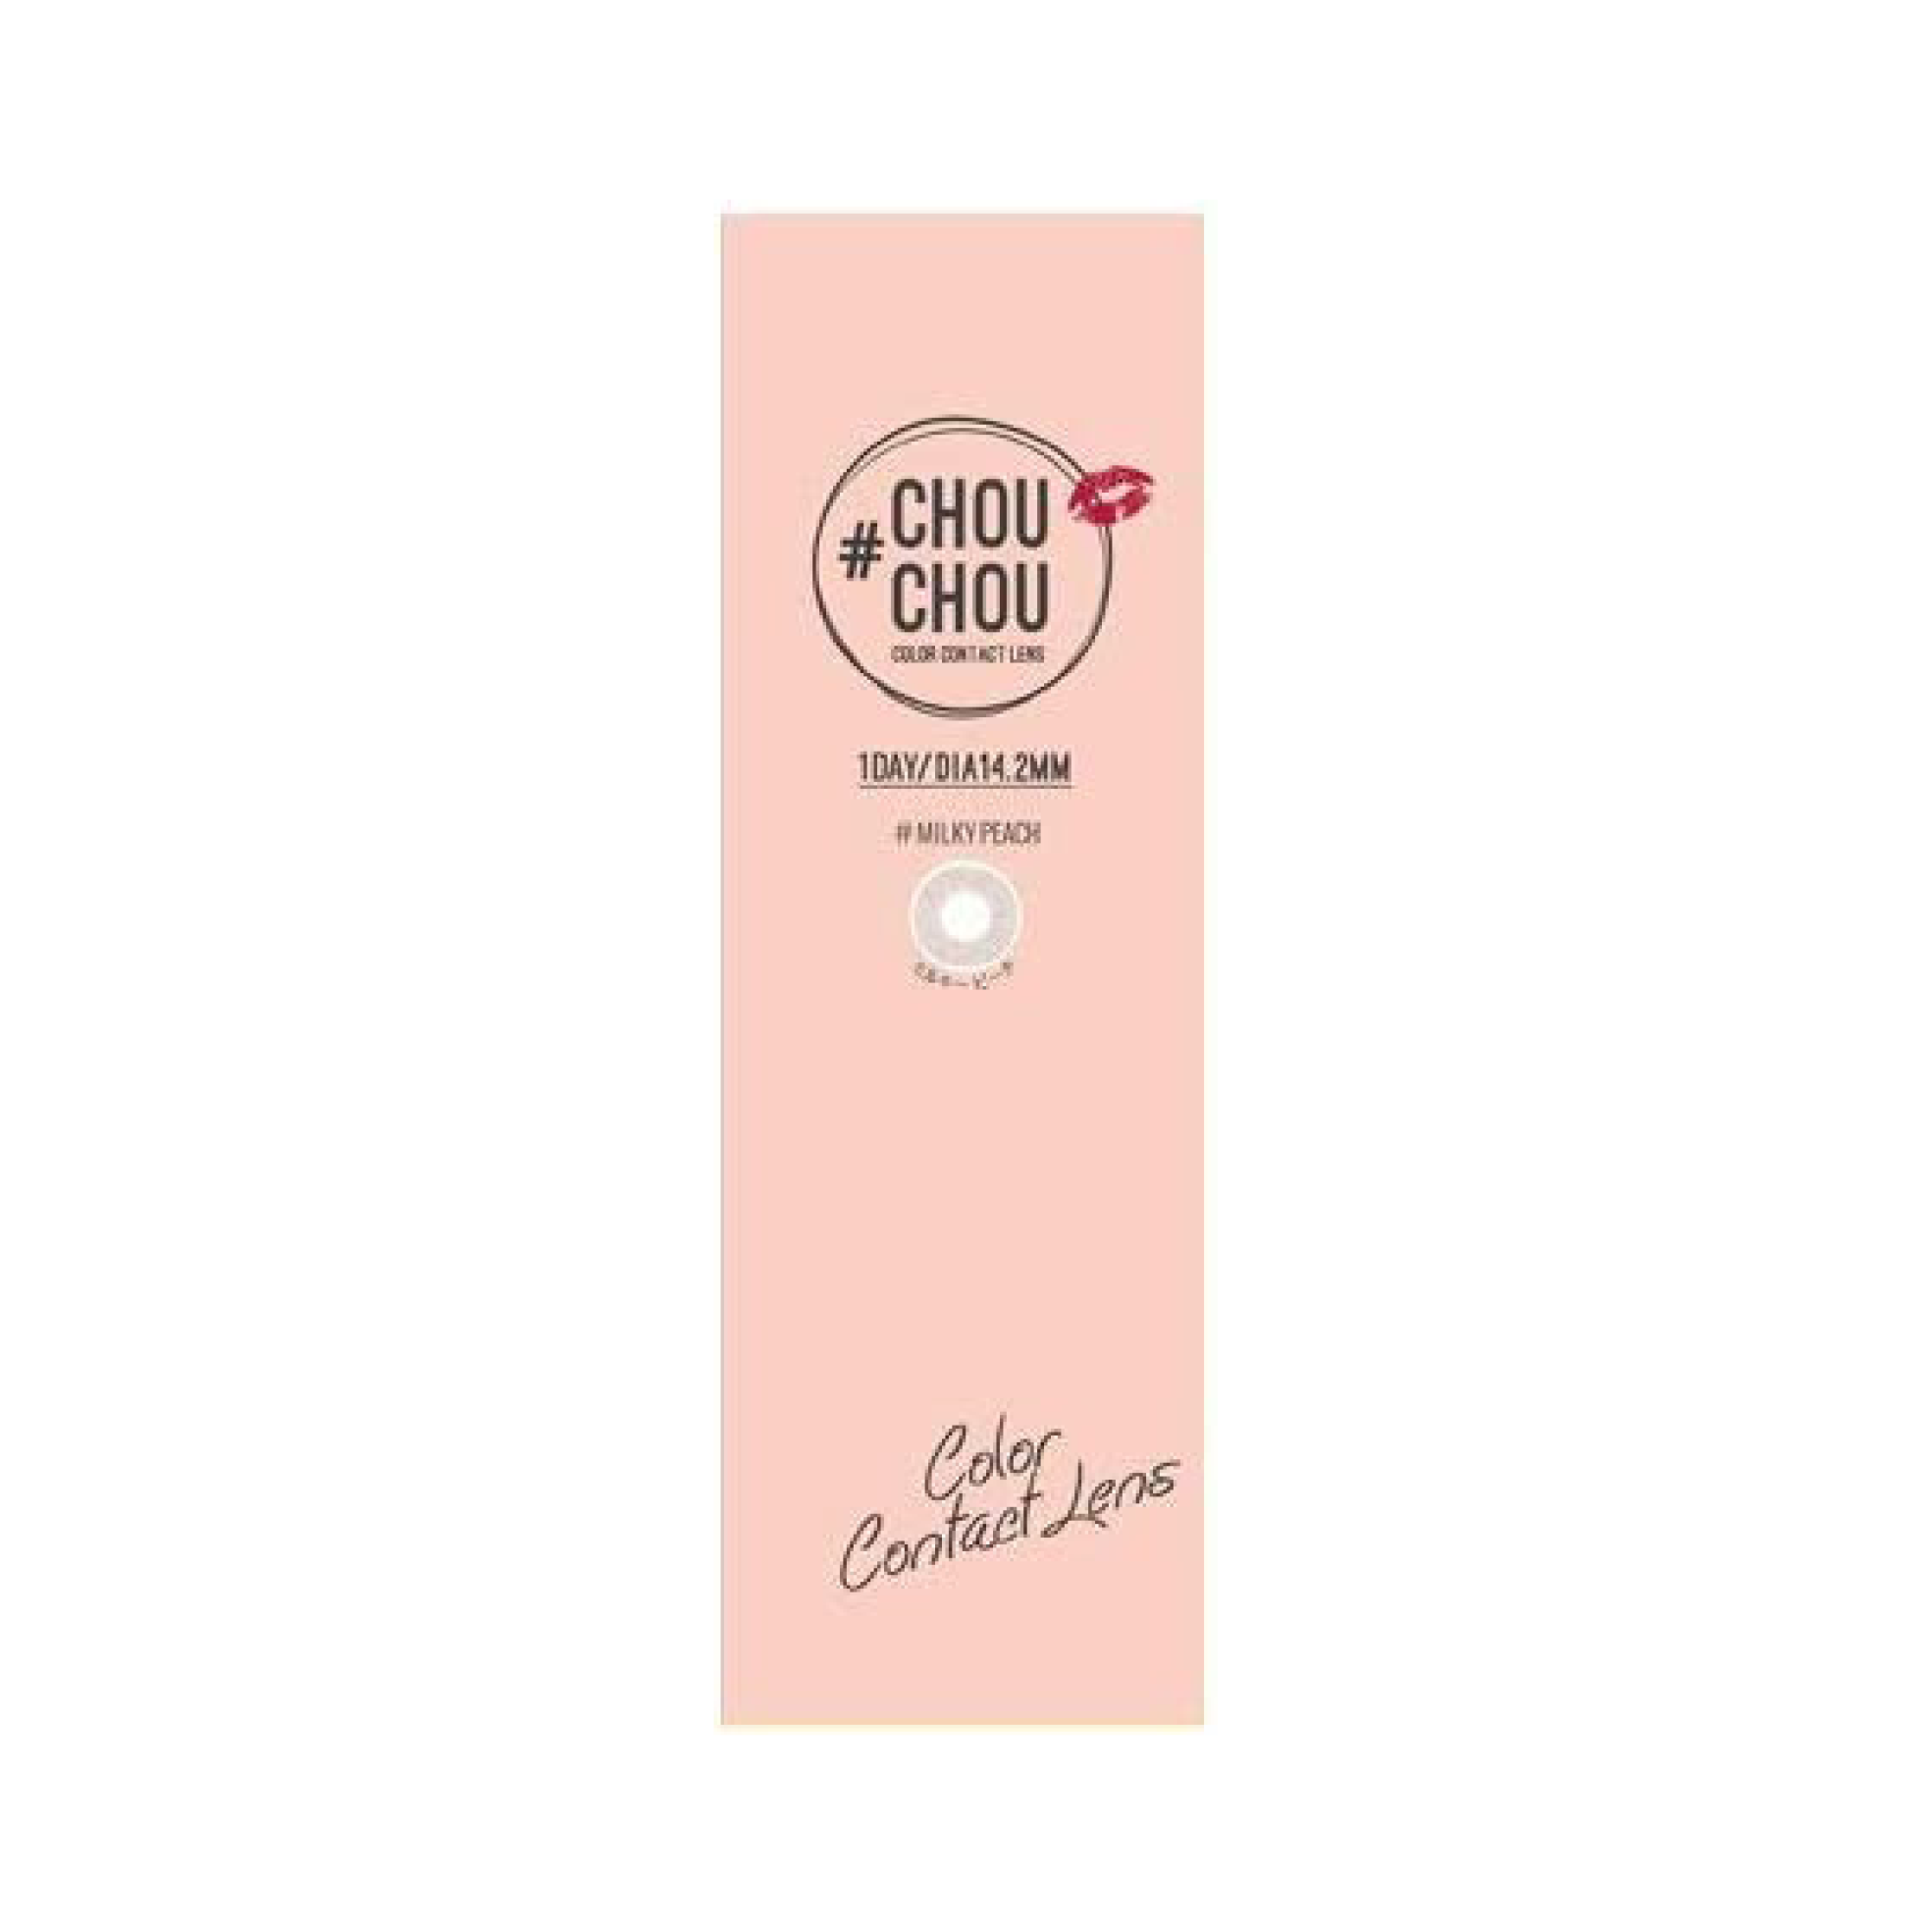 Chouchou 1-Day color contact lens #Milky peach日抛美瞳蜜桃牛奶｜10 Pcs